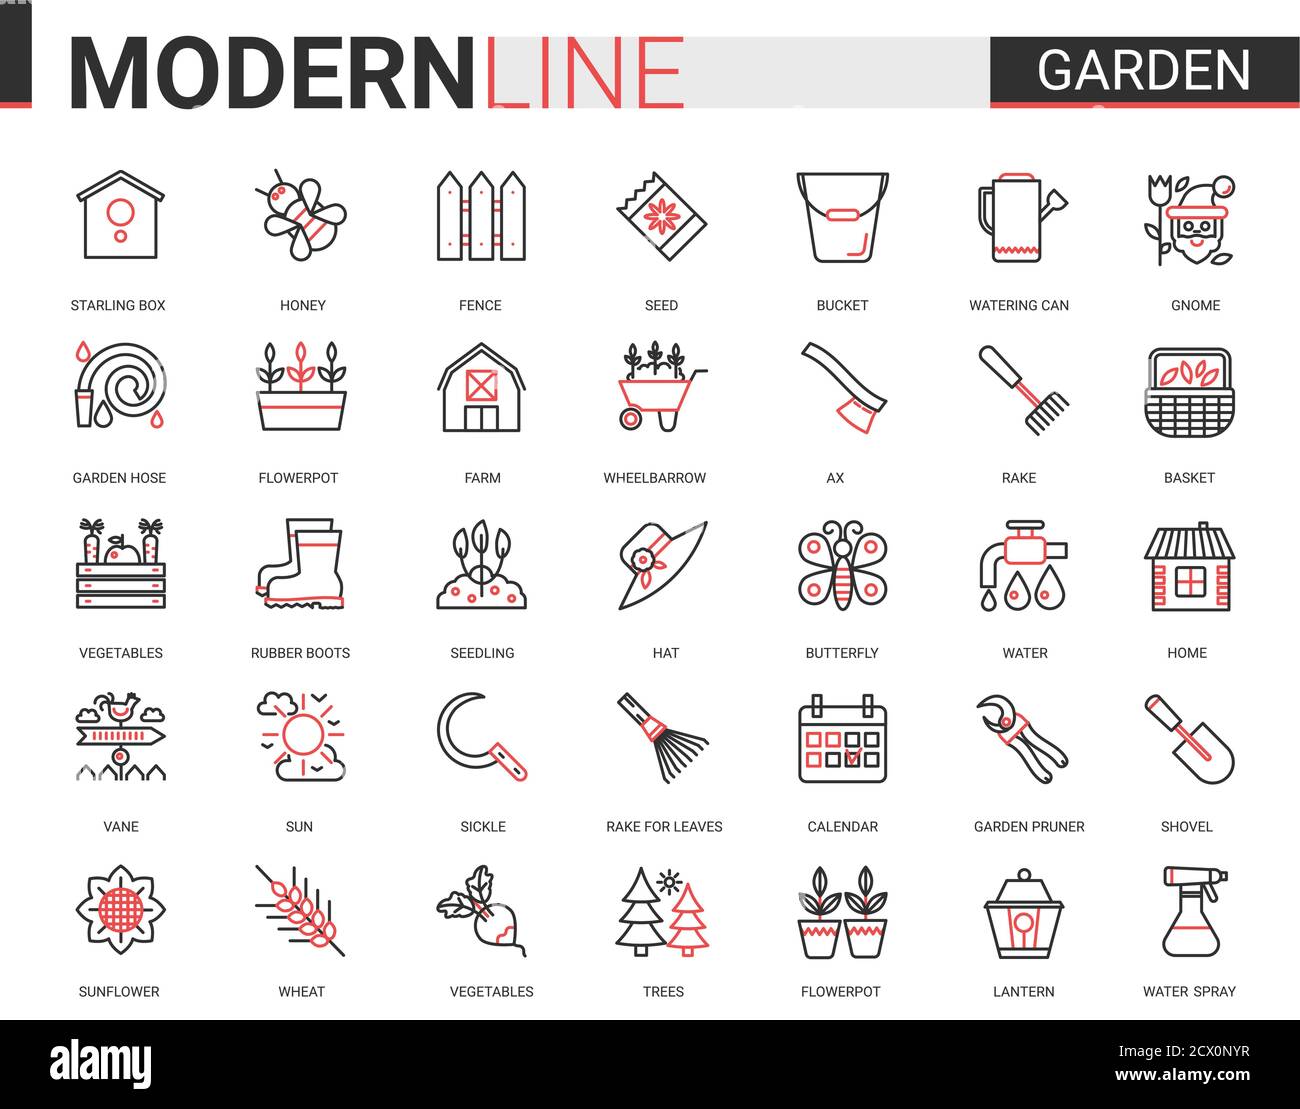 Garden farm tools flat icon vector illustration set. Red black thin line gardening or landscaping accessories for gardener farmer worker, agriculture equipment collection of outline pictogram symbols Stock Vector